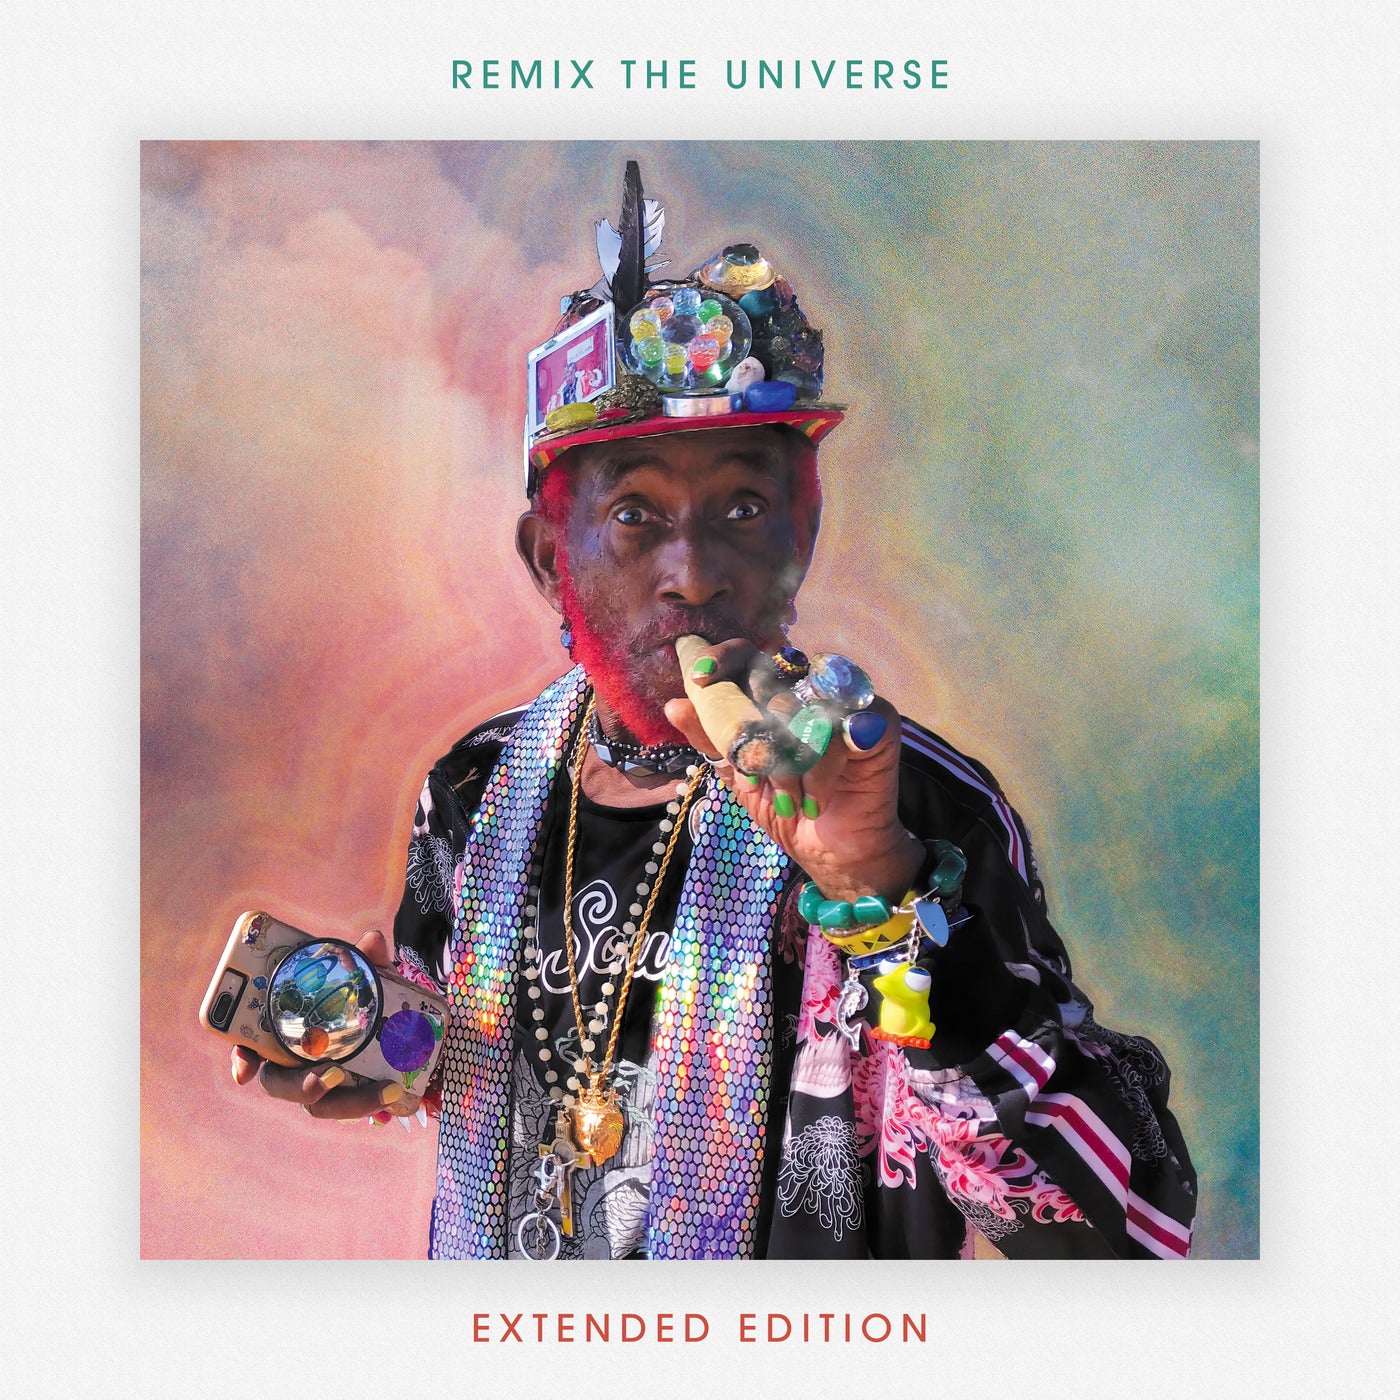 Remix the Universe - Extended Edition